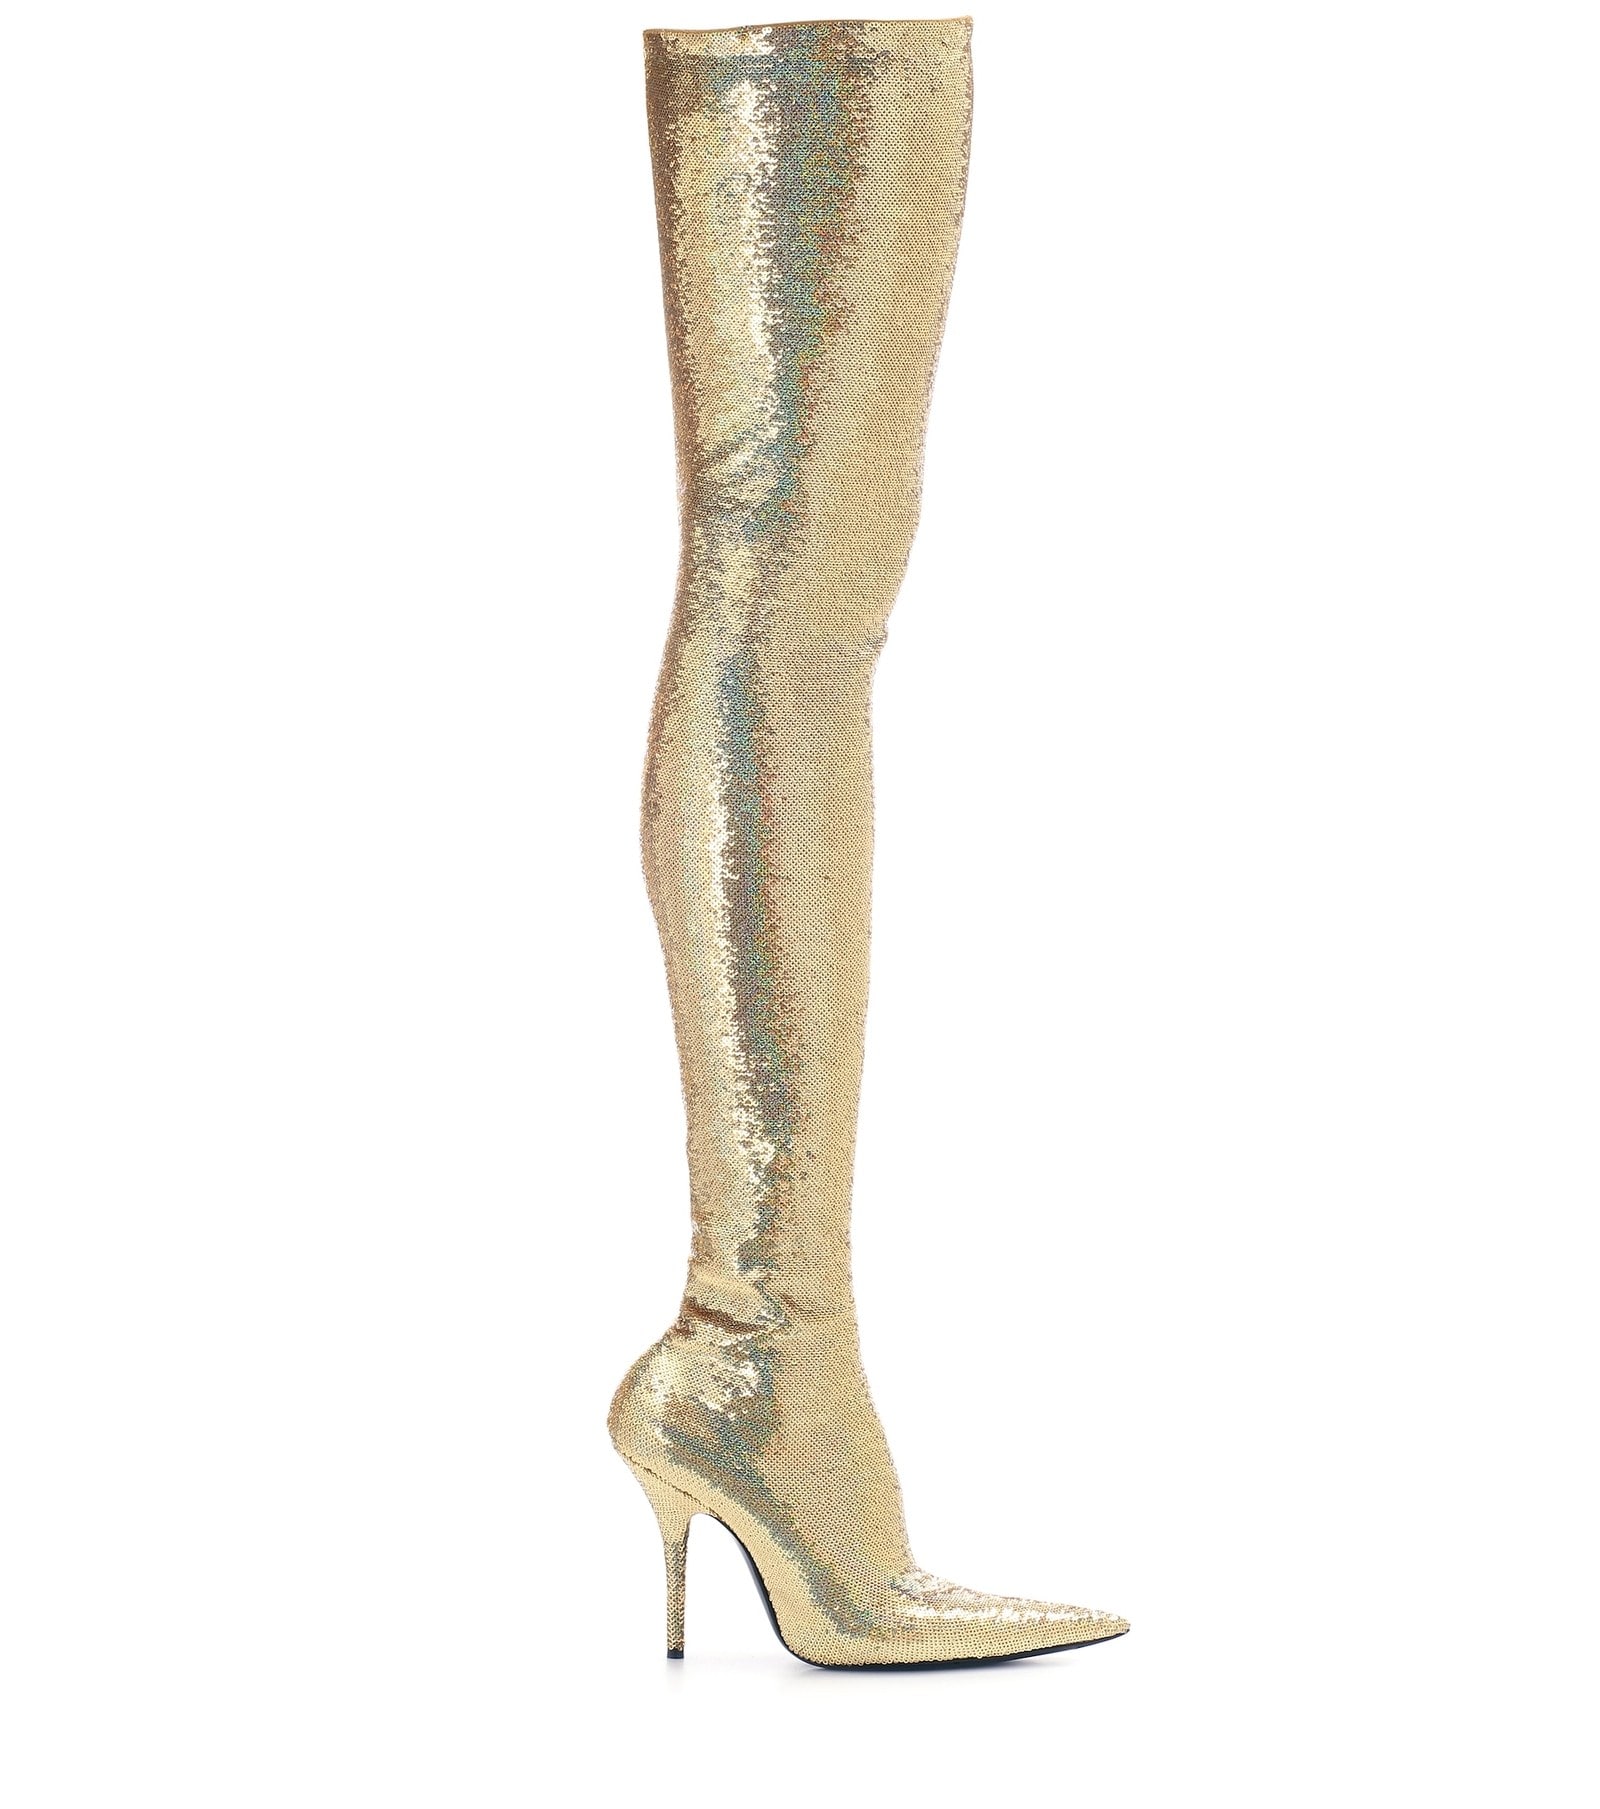 Holographic Thigh-high Boots Worth 